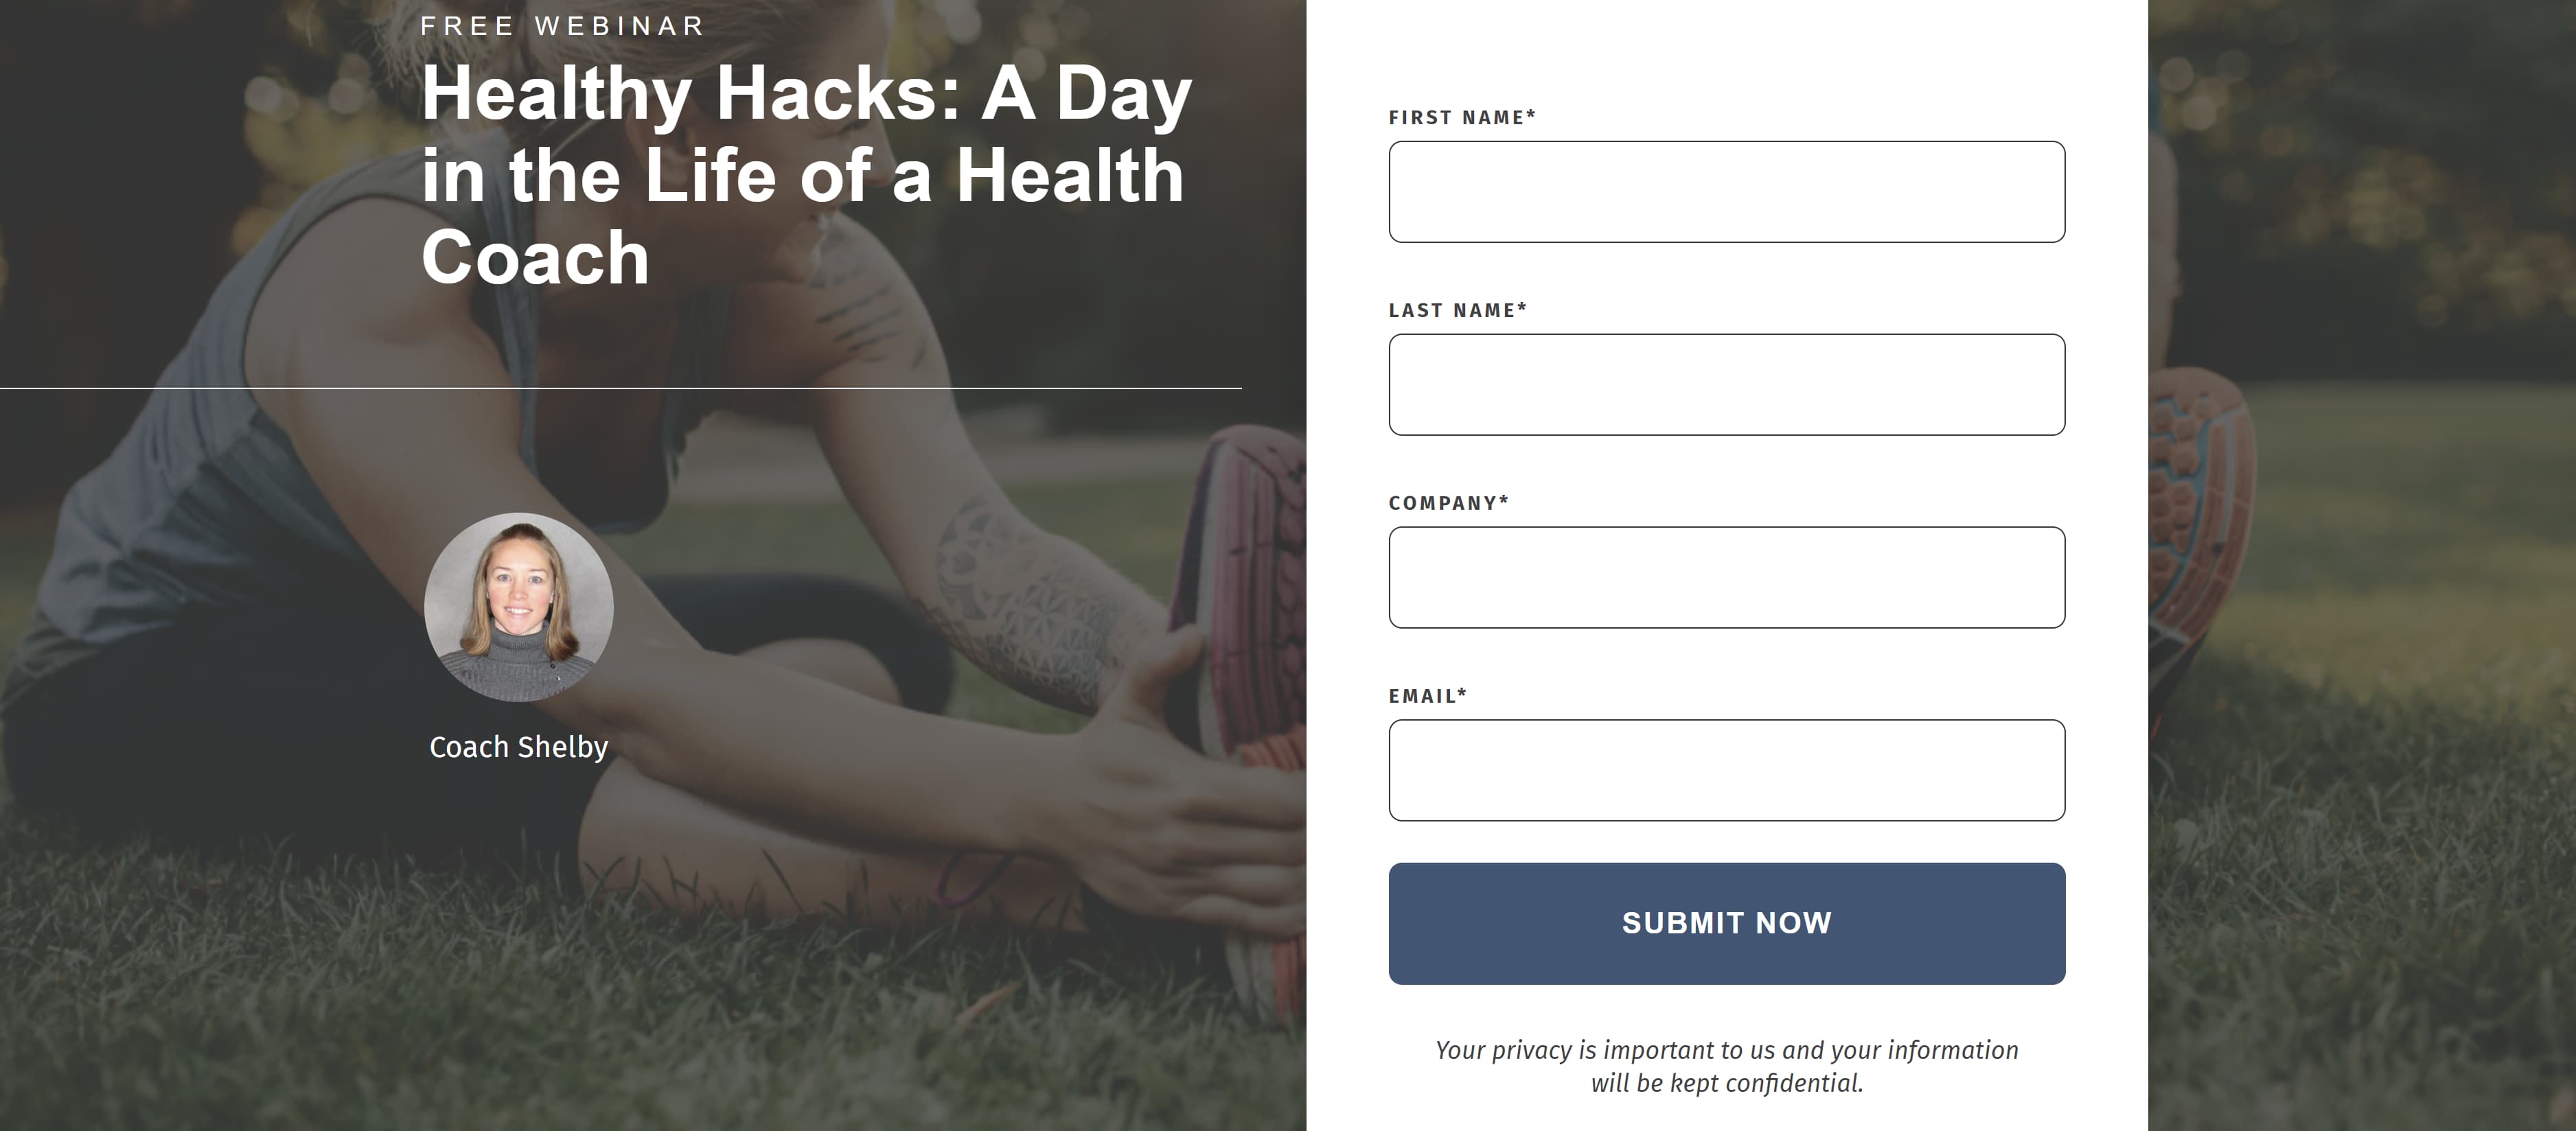 Webinar landing page example from HealthCheck360